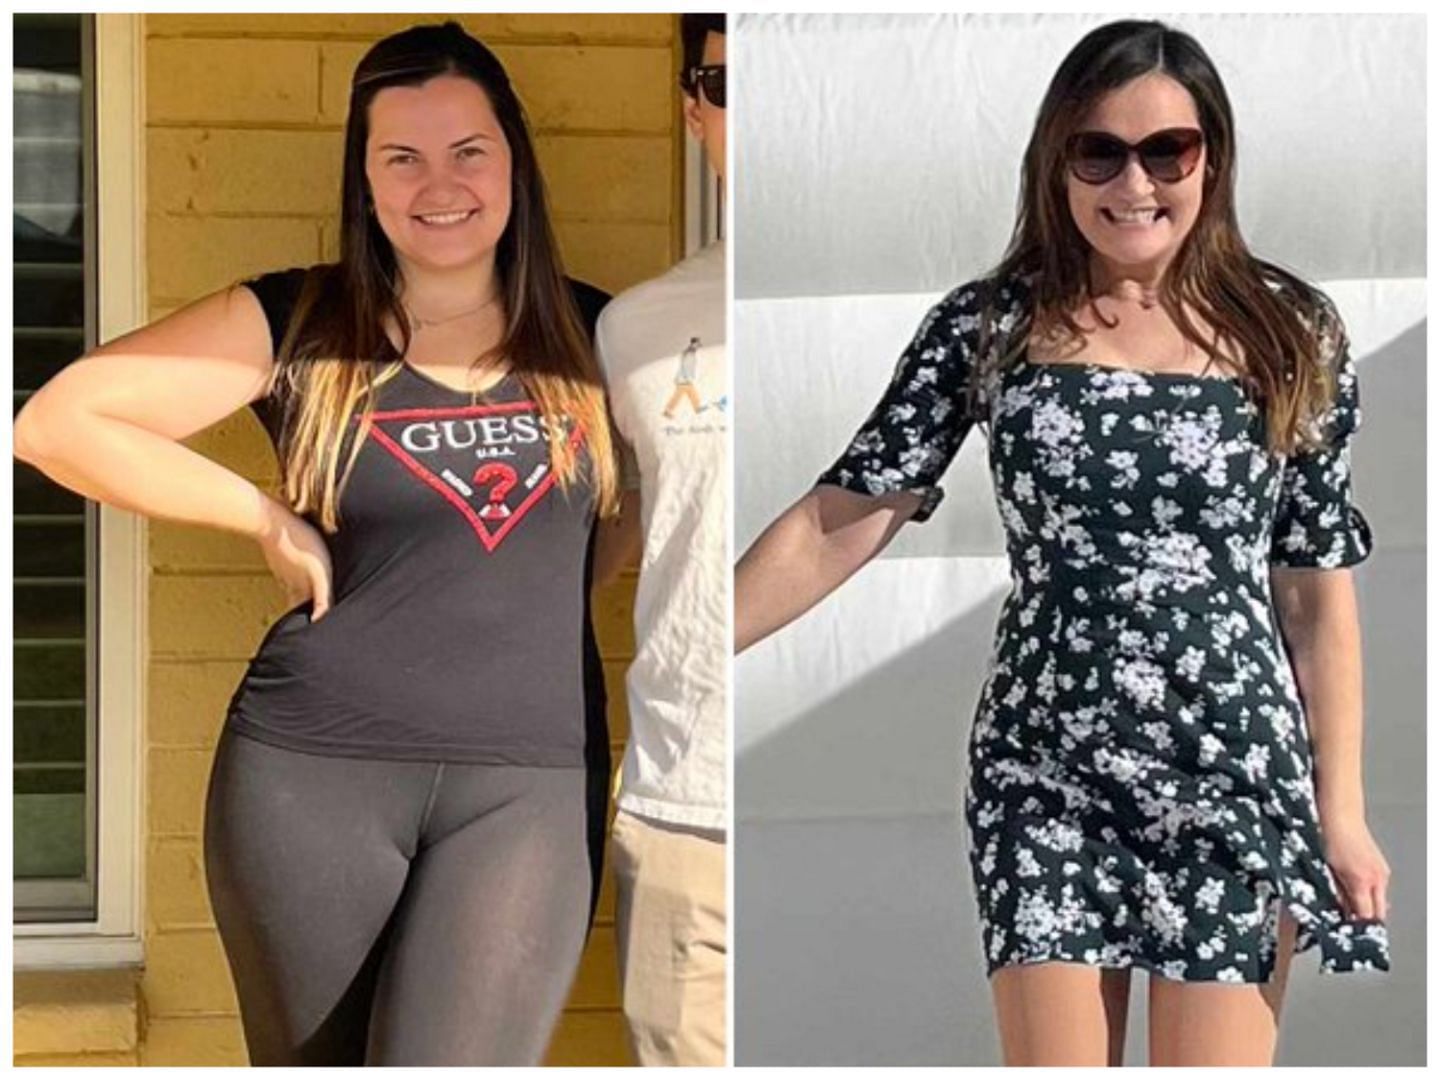  nurse who took Ozempic to shed nearly 25 KGs. (Image via Twitter @people)